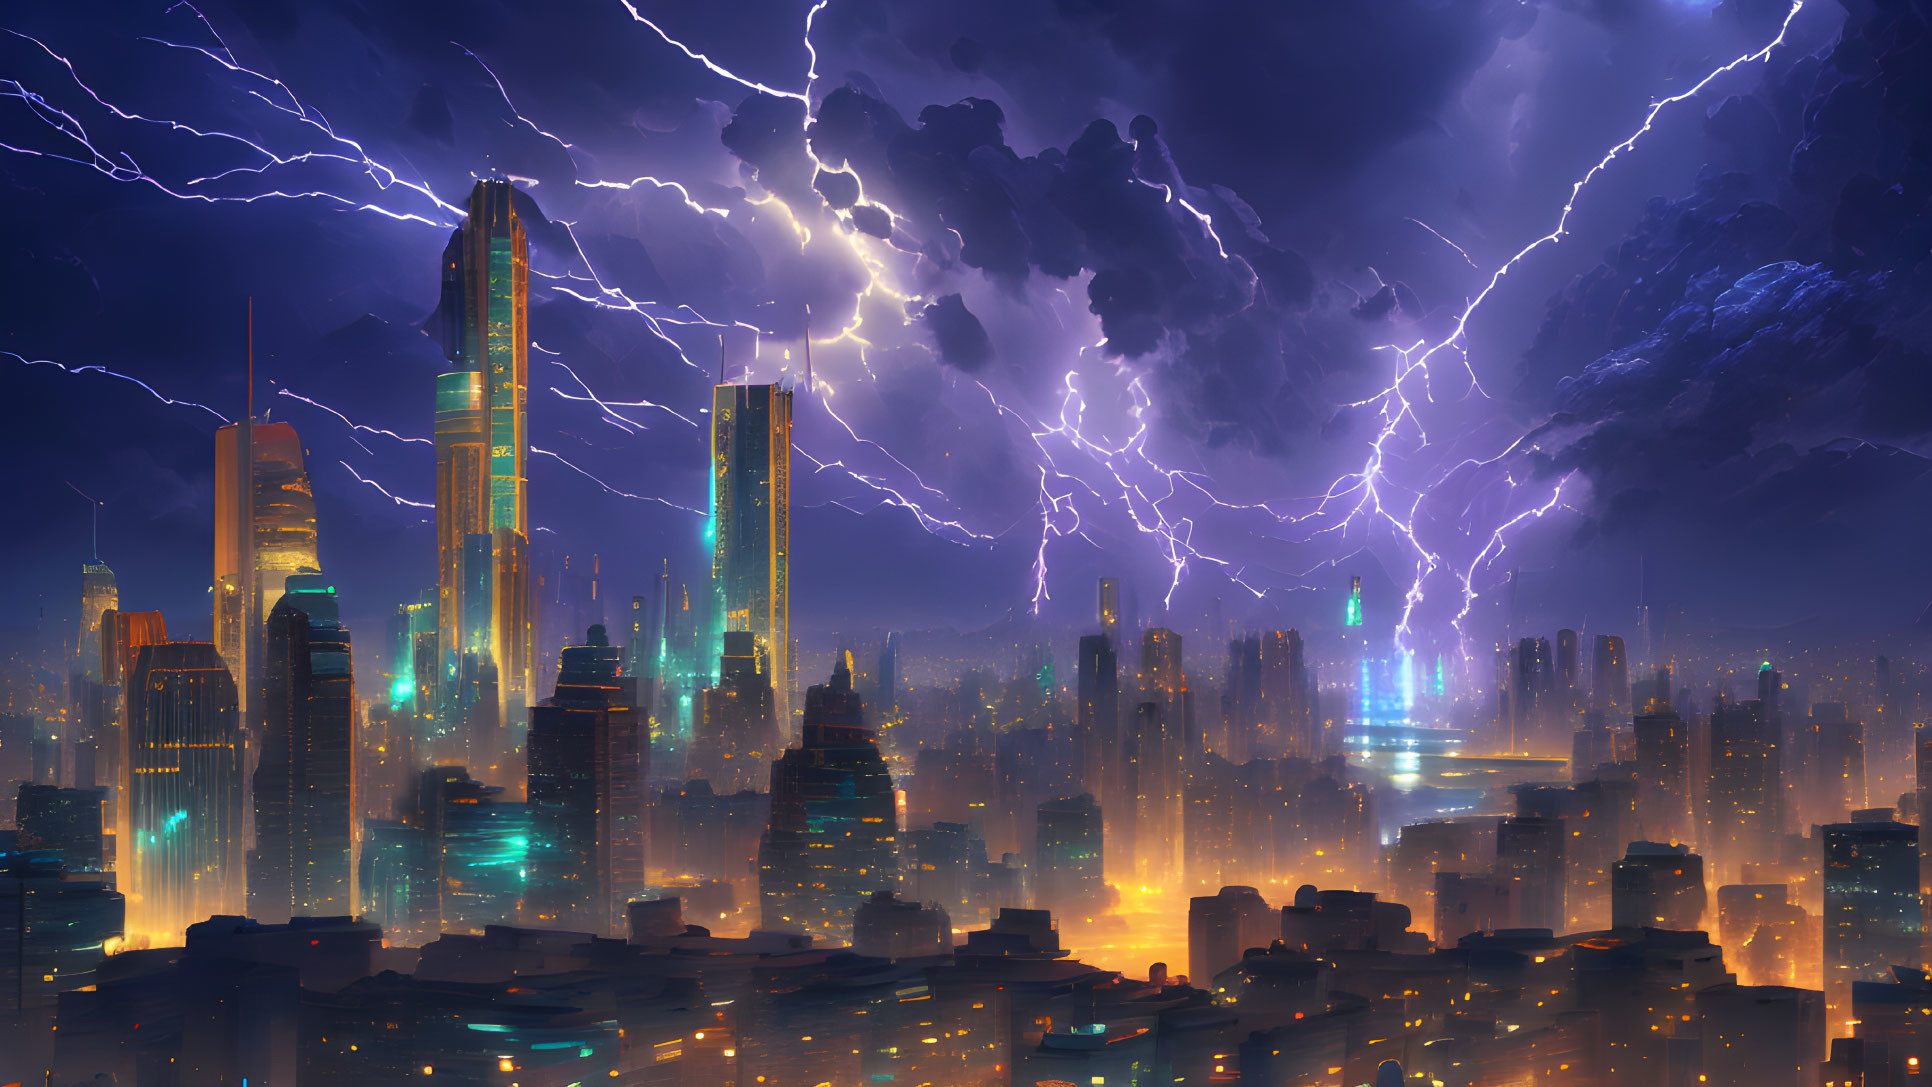 Futuristic night cityscape with skyscrapers and lightning